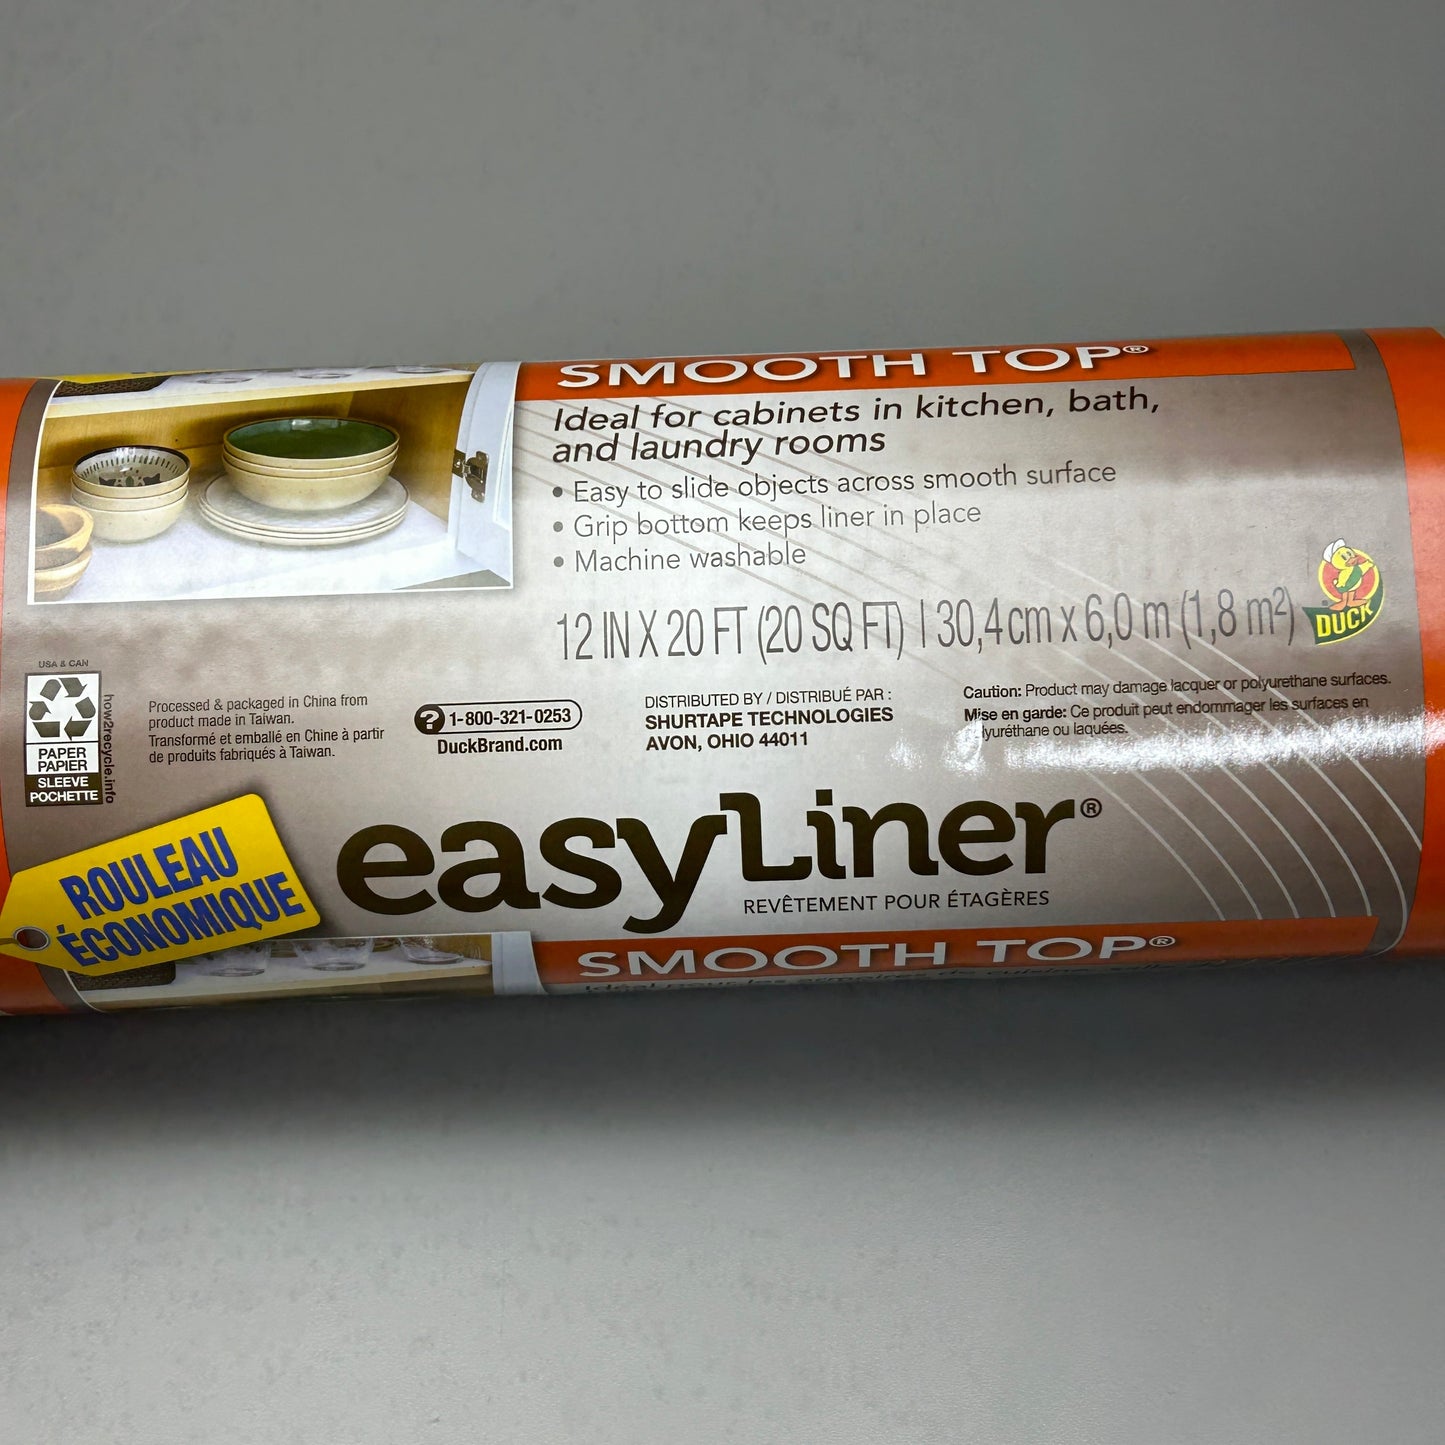 Duck Brand Easy Liner Smooth Top 12 x 20' Shelf Liner | White